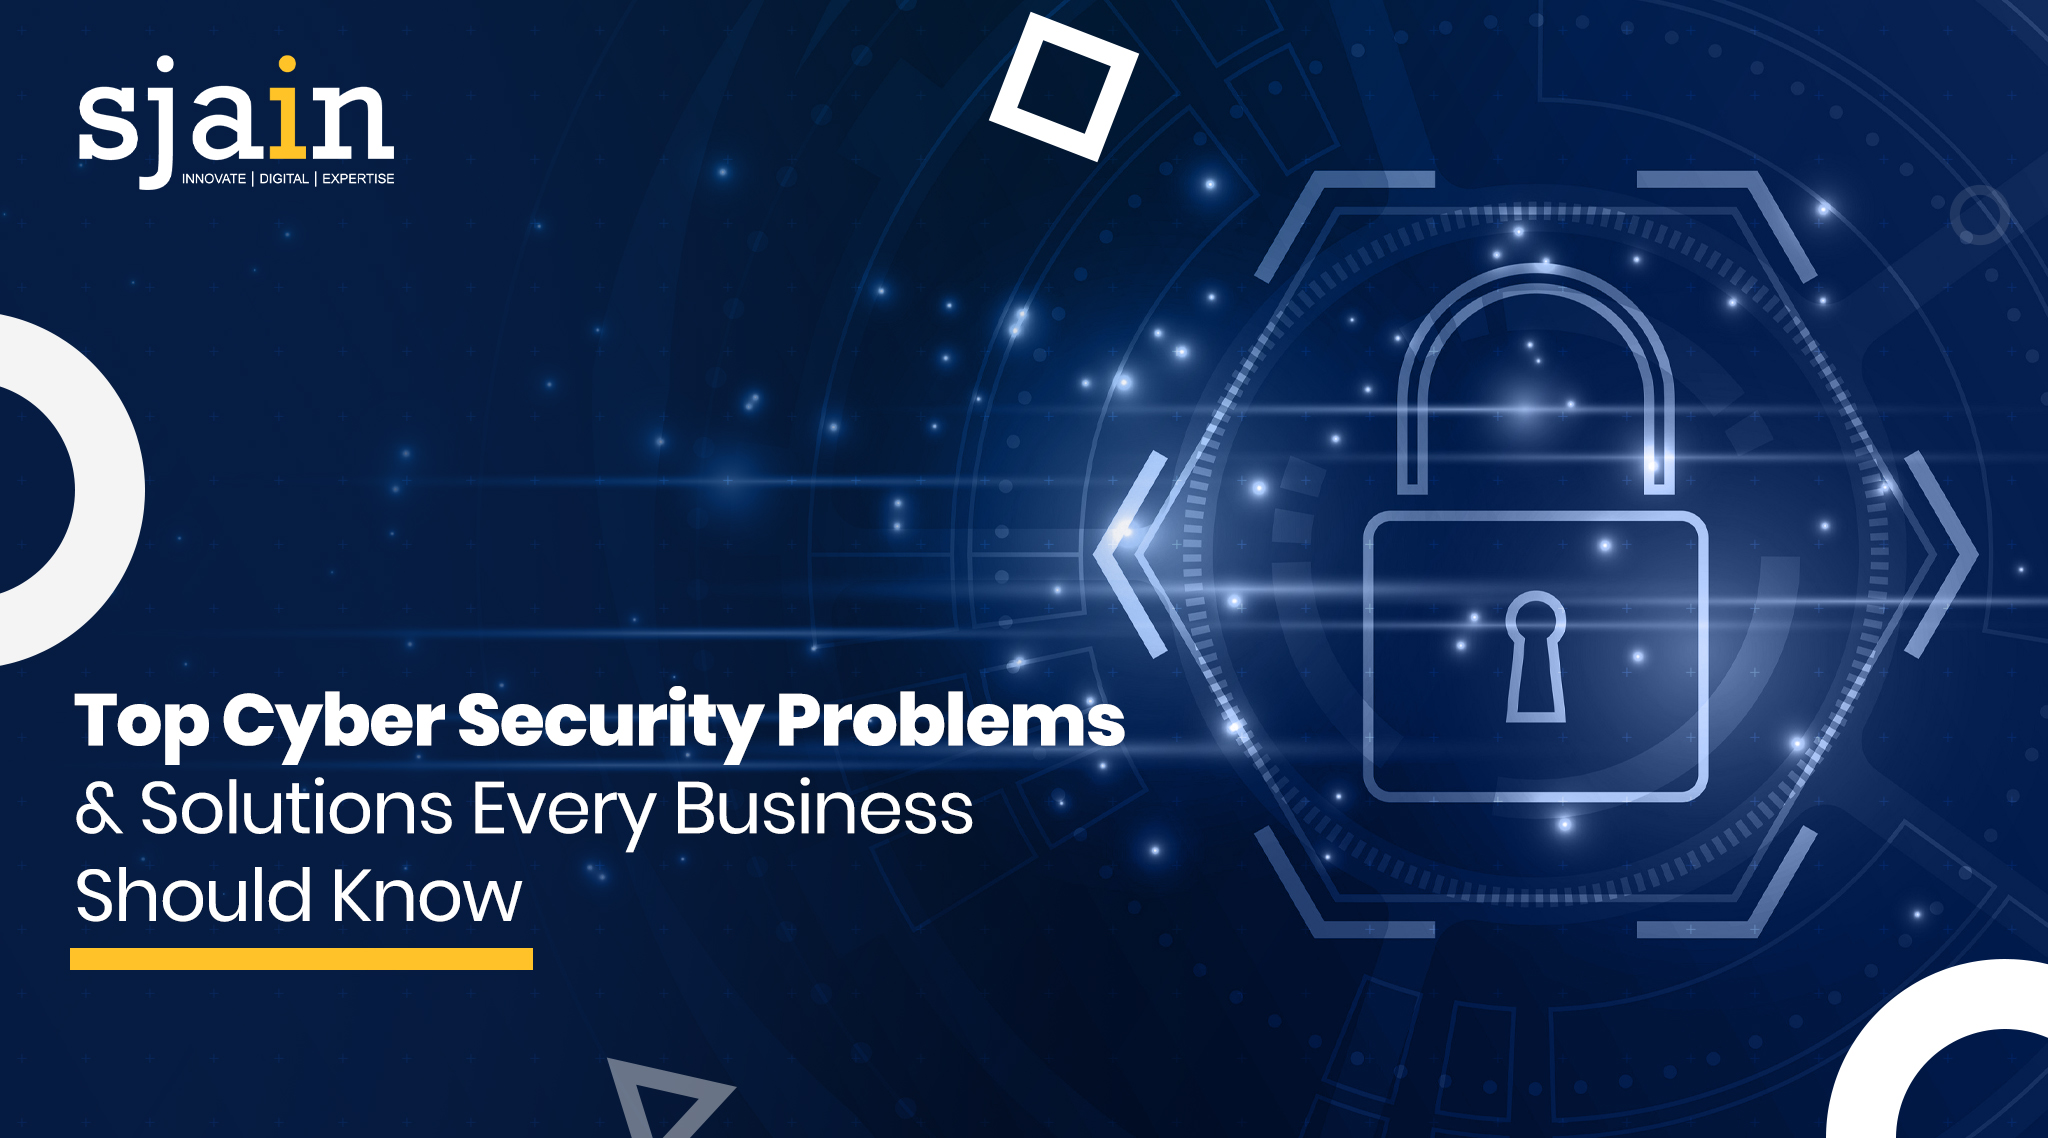 Top Cyber Security Problems and Solutions Every Business Should Know